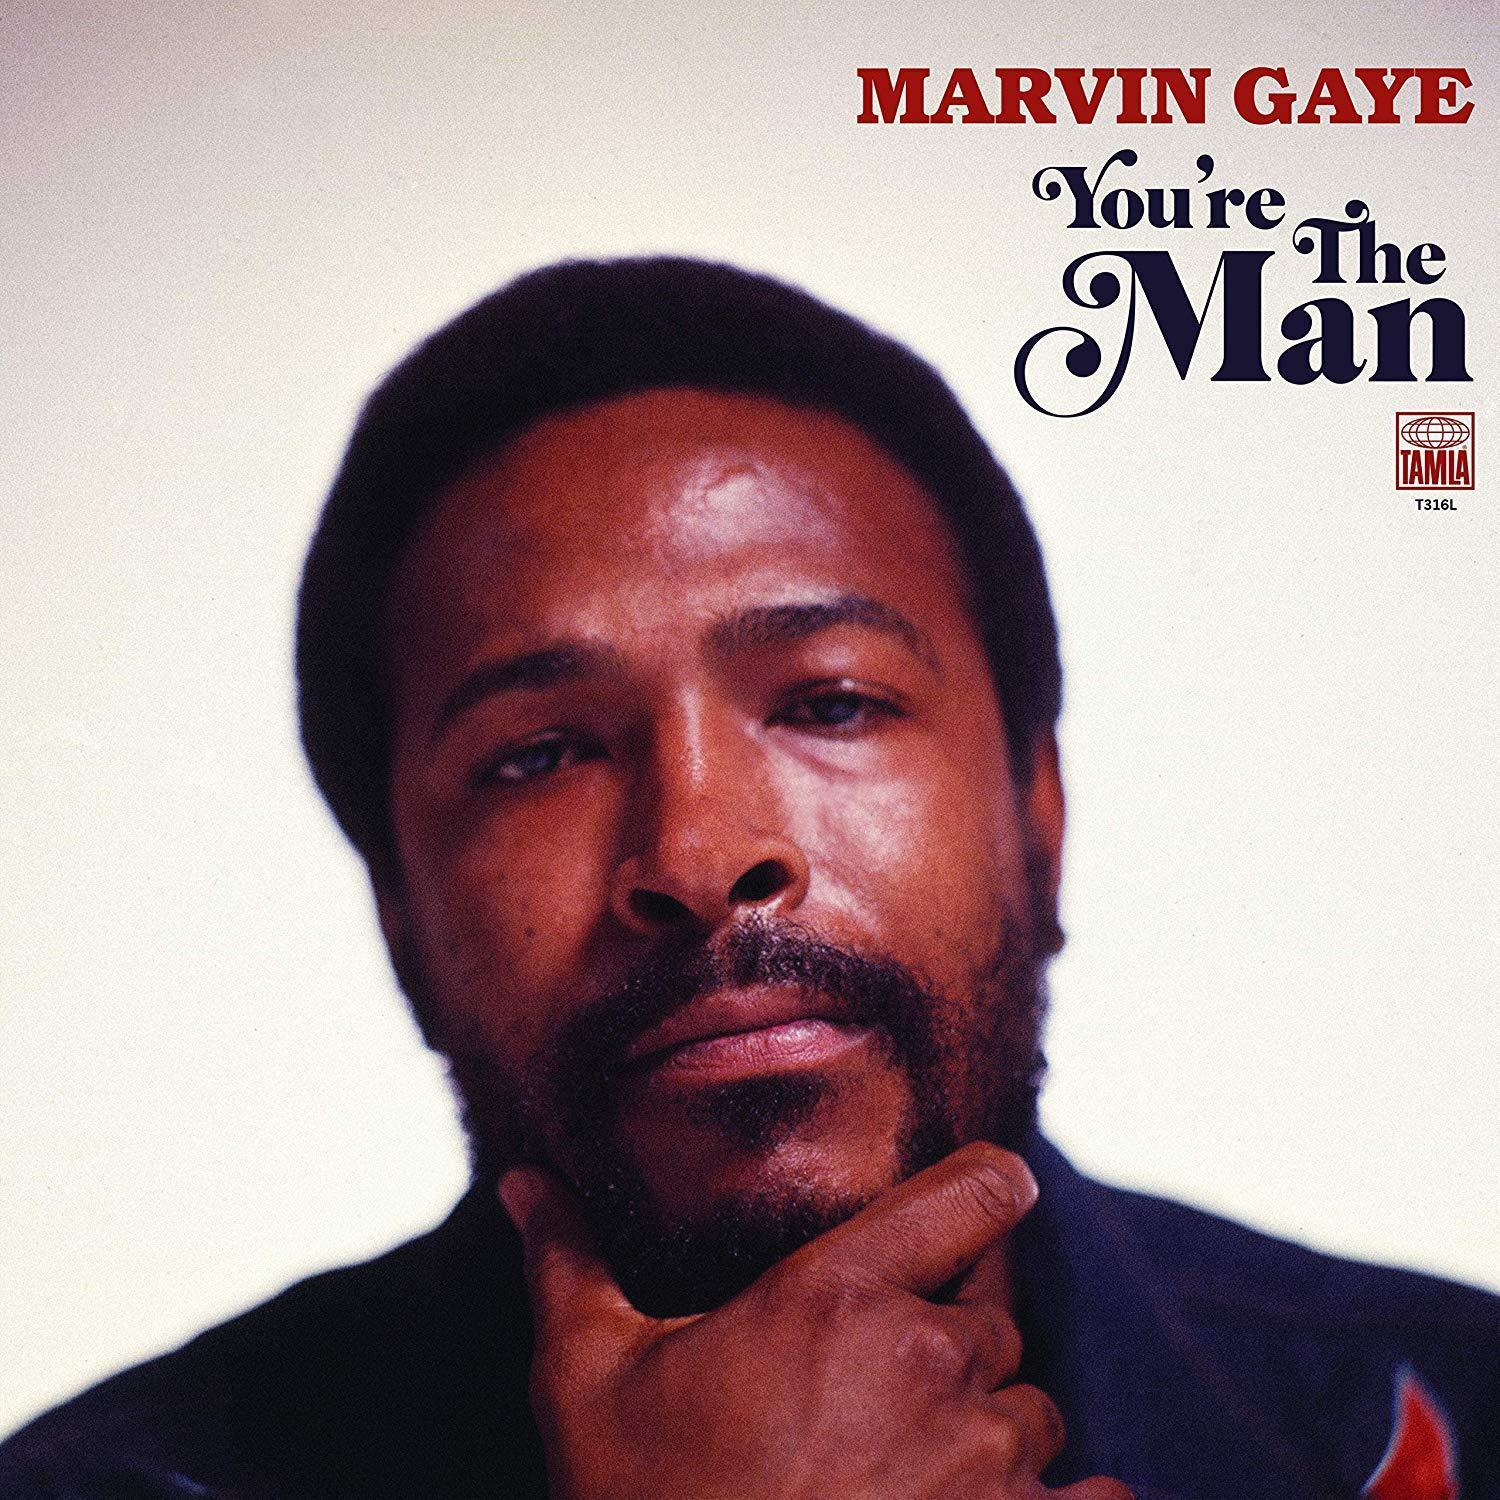 Marvin Gaye - You're The Man (2 LP) - Joco Records